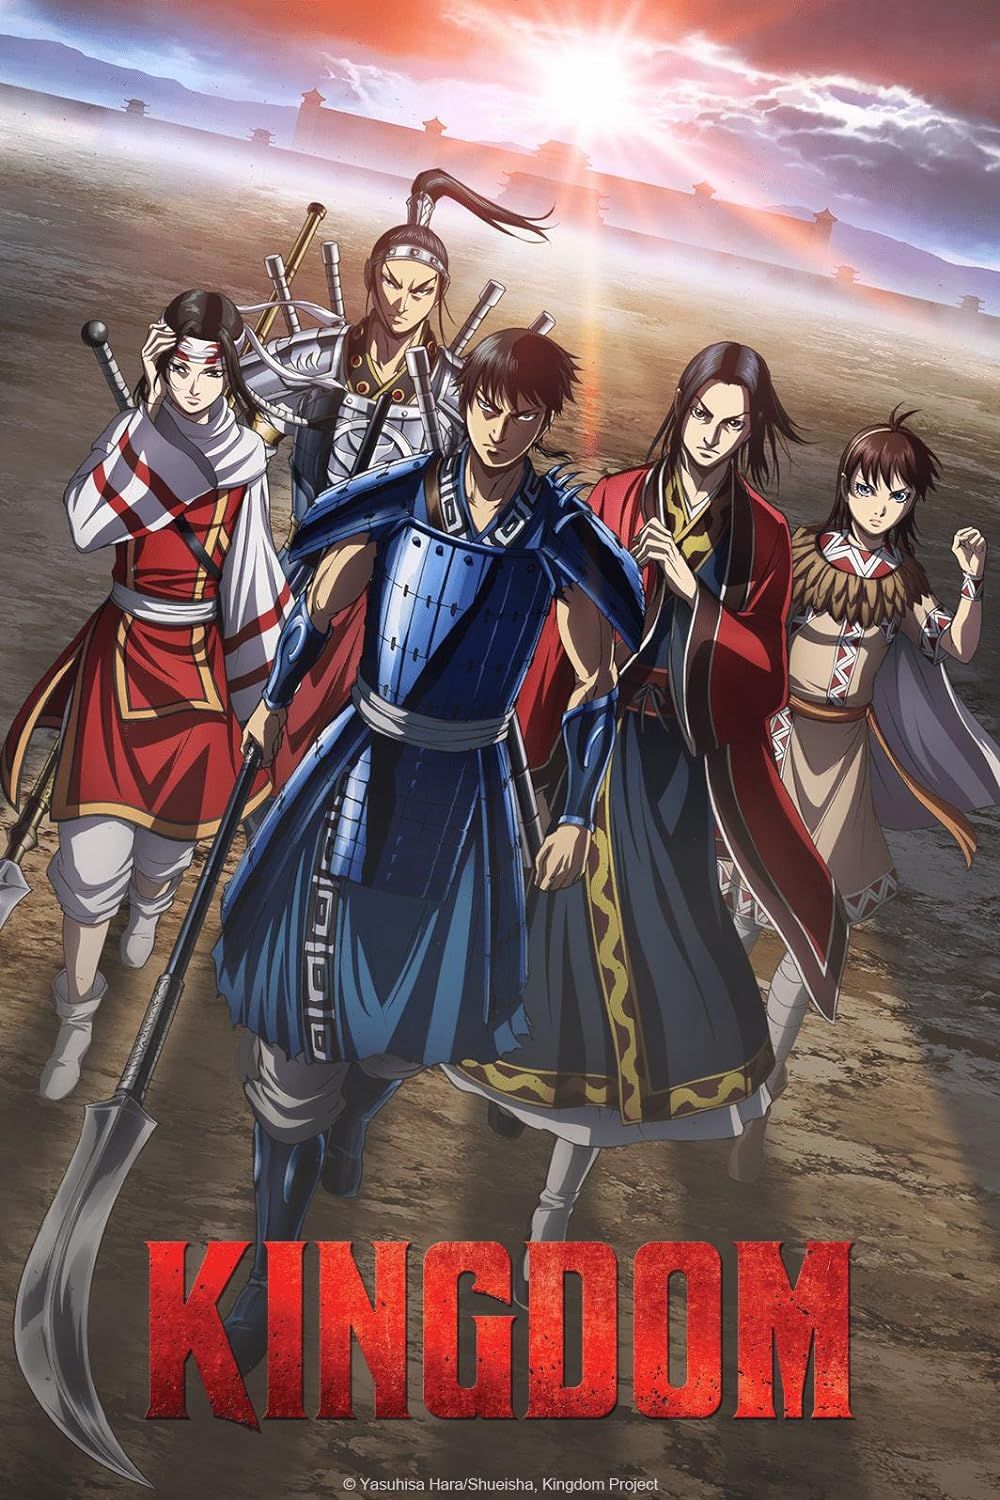 The cast of Kingdom approaching the barren land in Kingdom anime poster